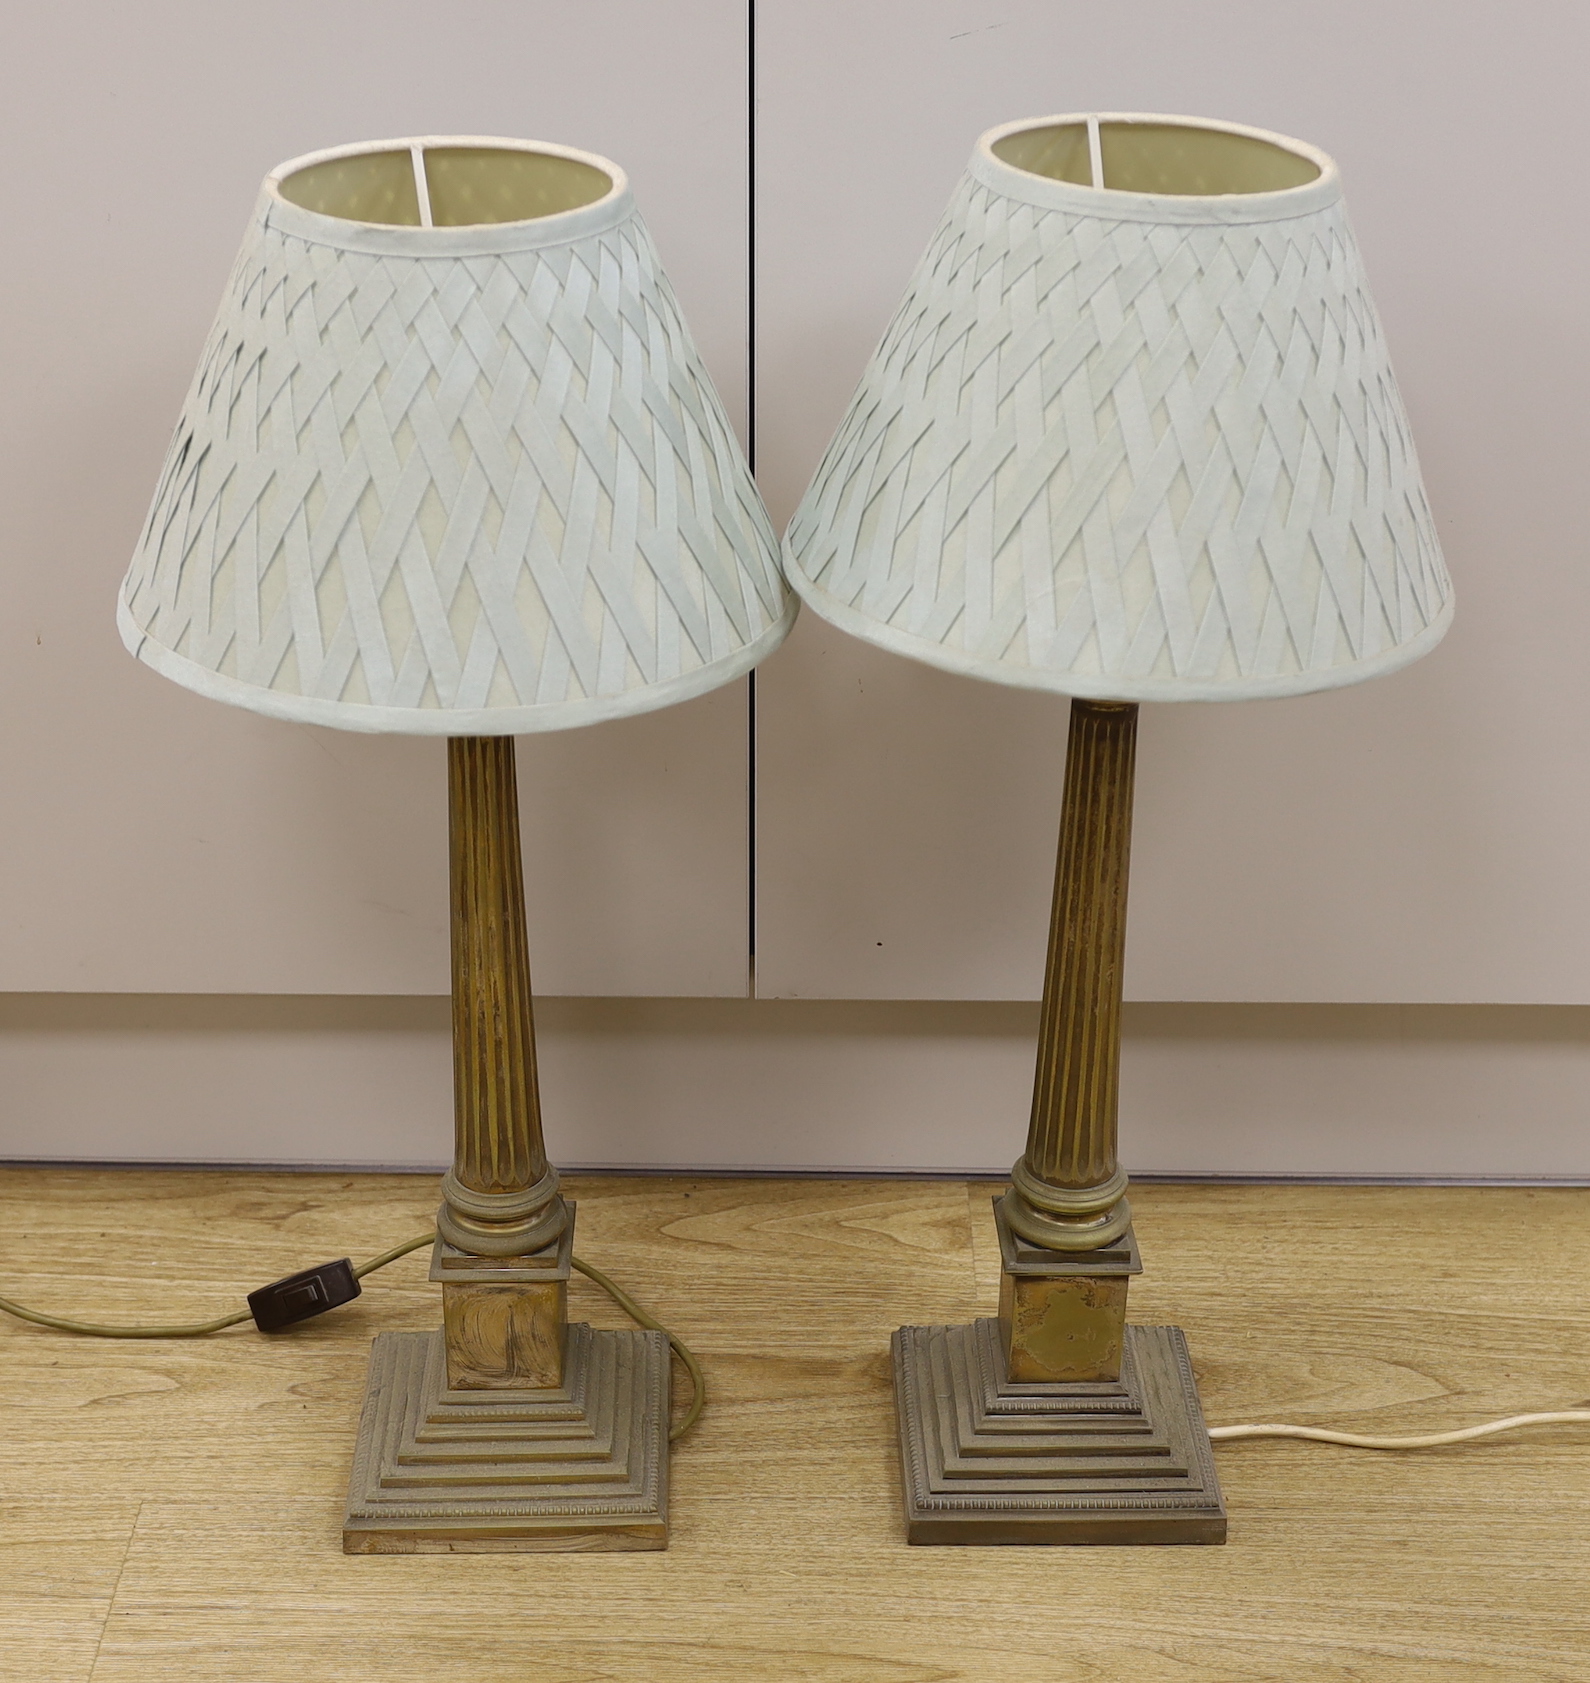 A pair of plated Corinthian column table lamps with green silk shades, 49.5cm tall